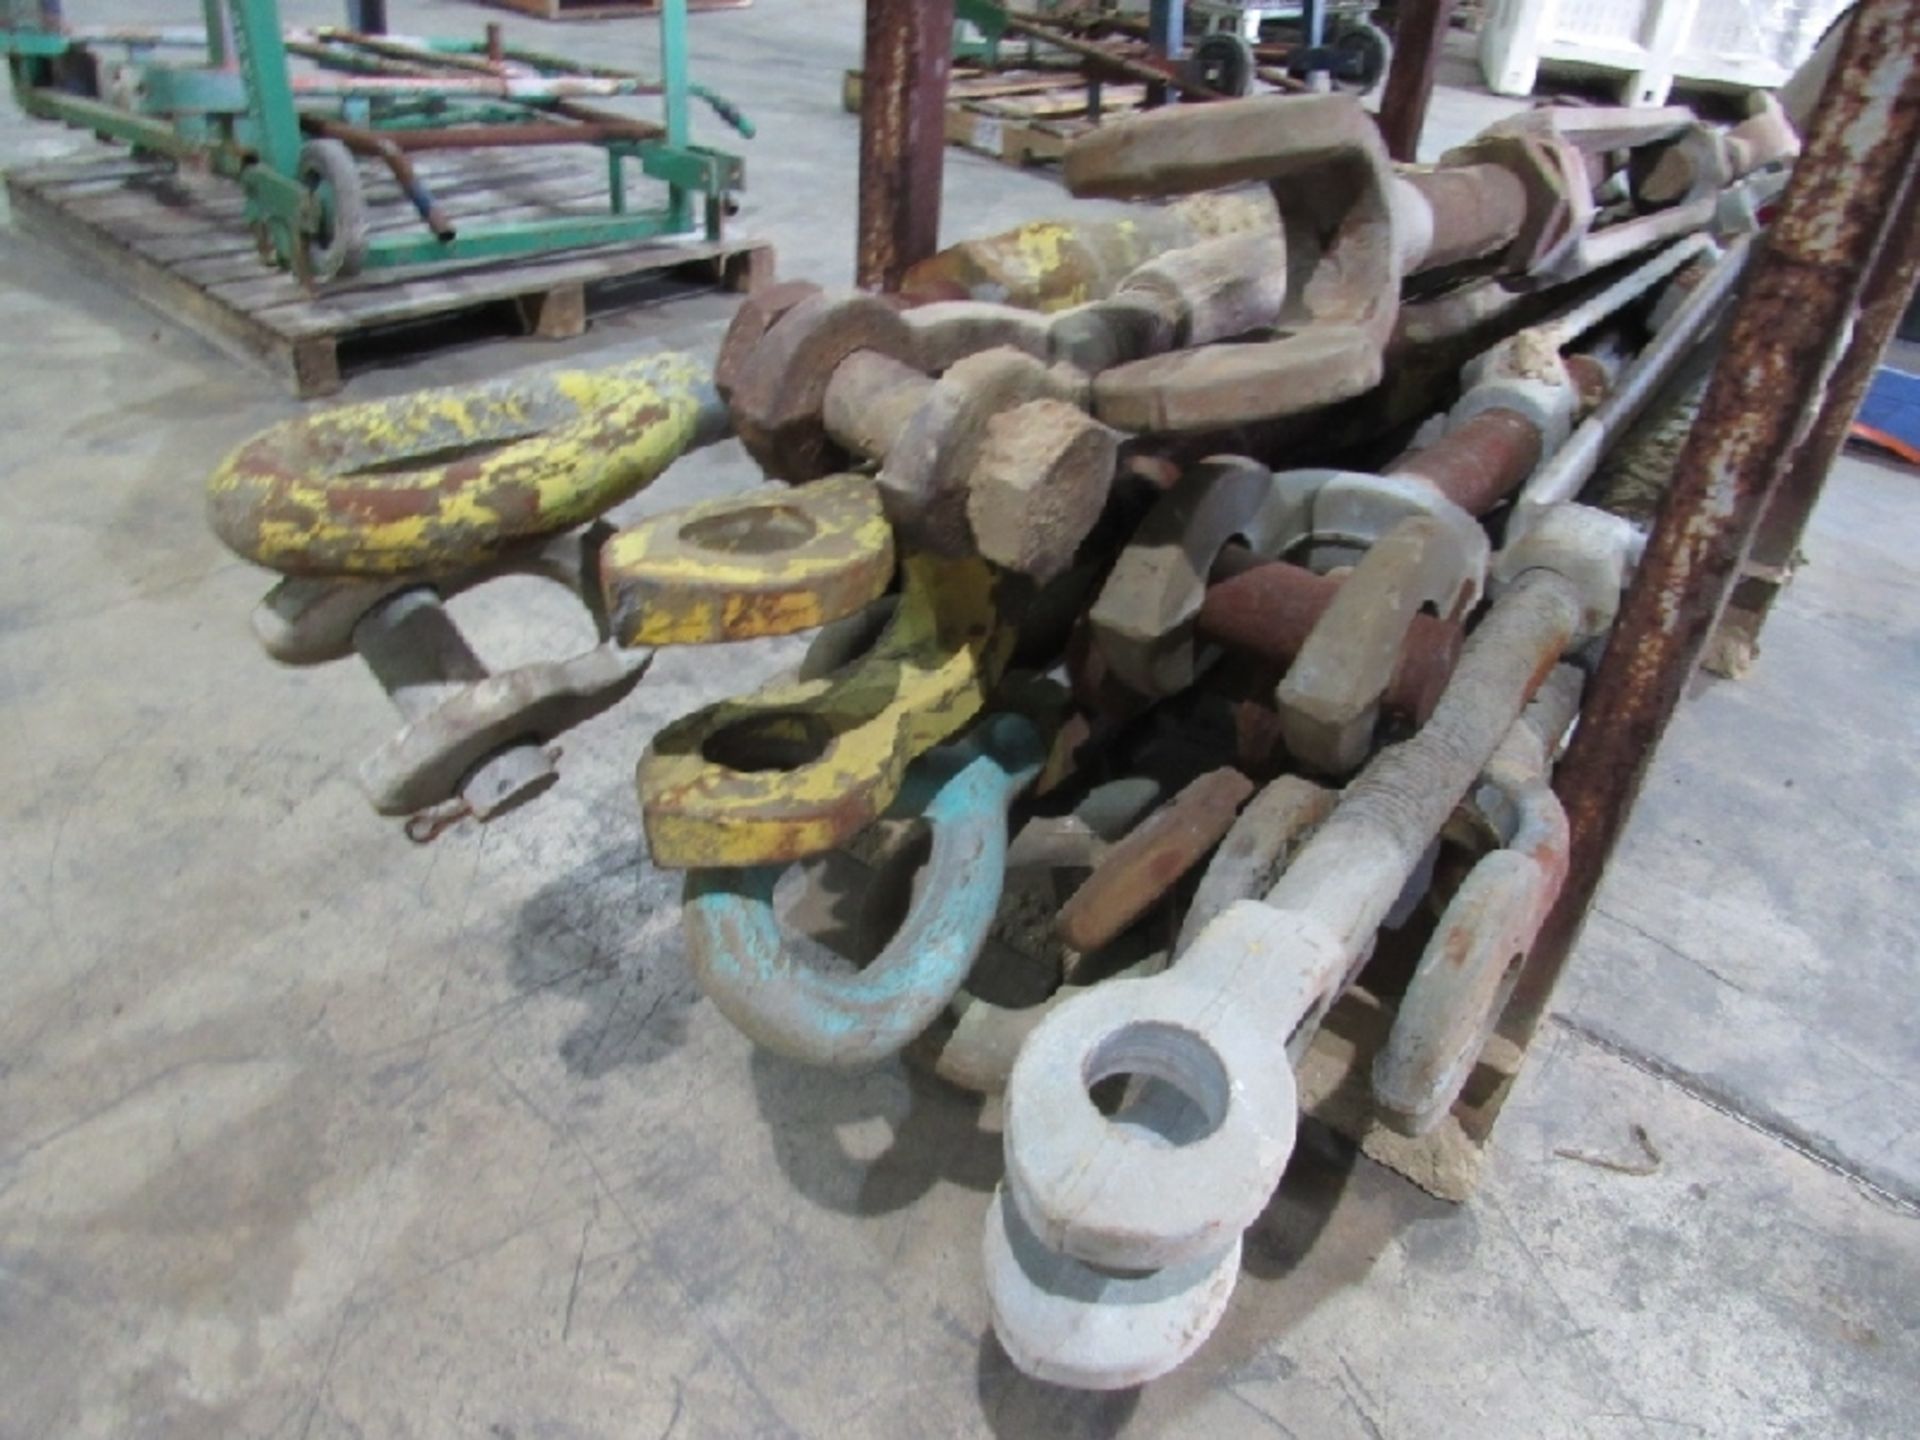 (approx qty - 20) Turnbuckles and Rack- ***Located in Chattanooga, TN*** MFR - Unknown Sizes Range - Bild 8 aus 8